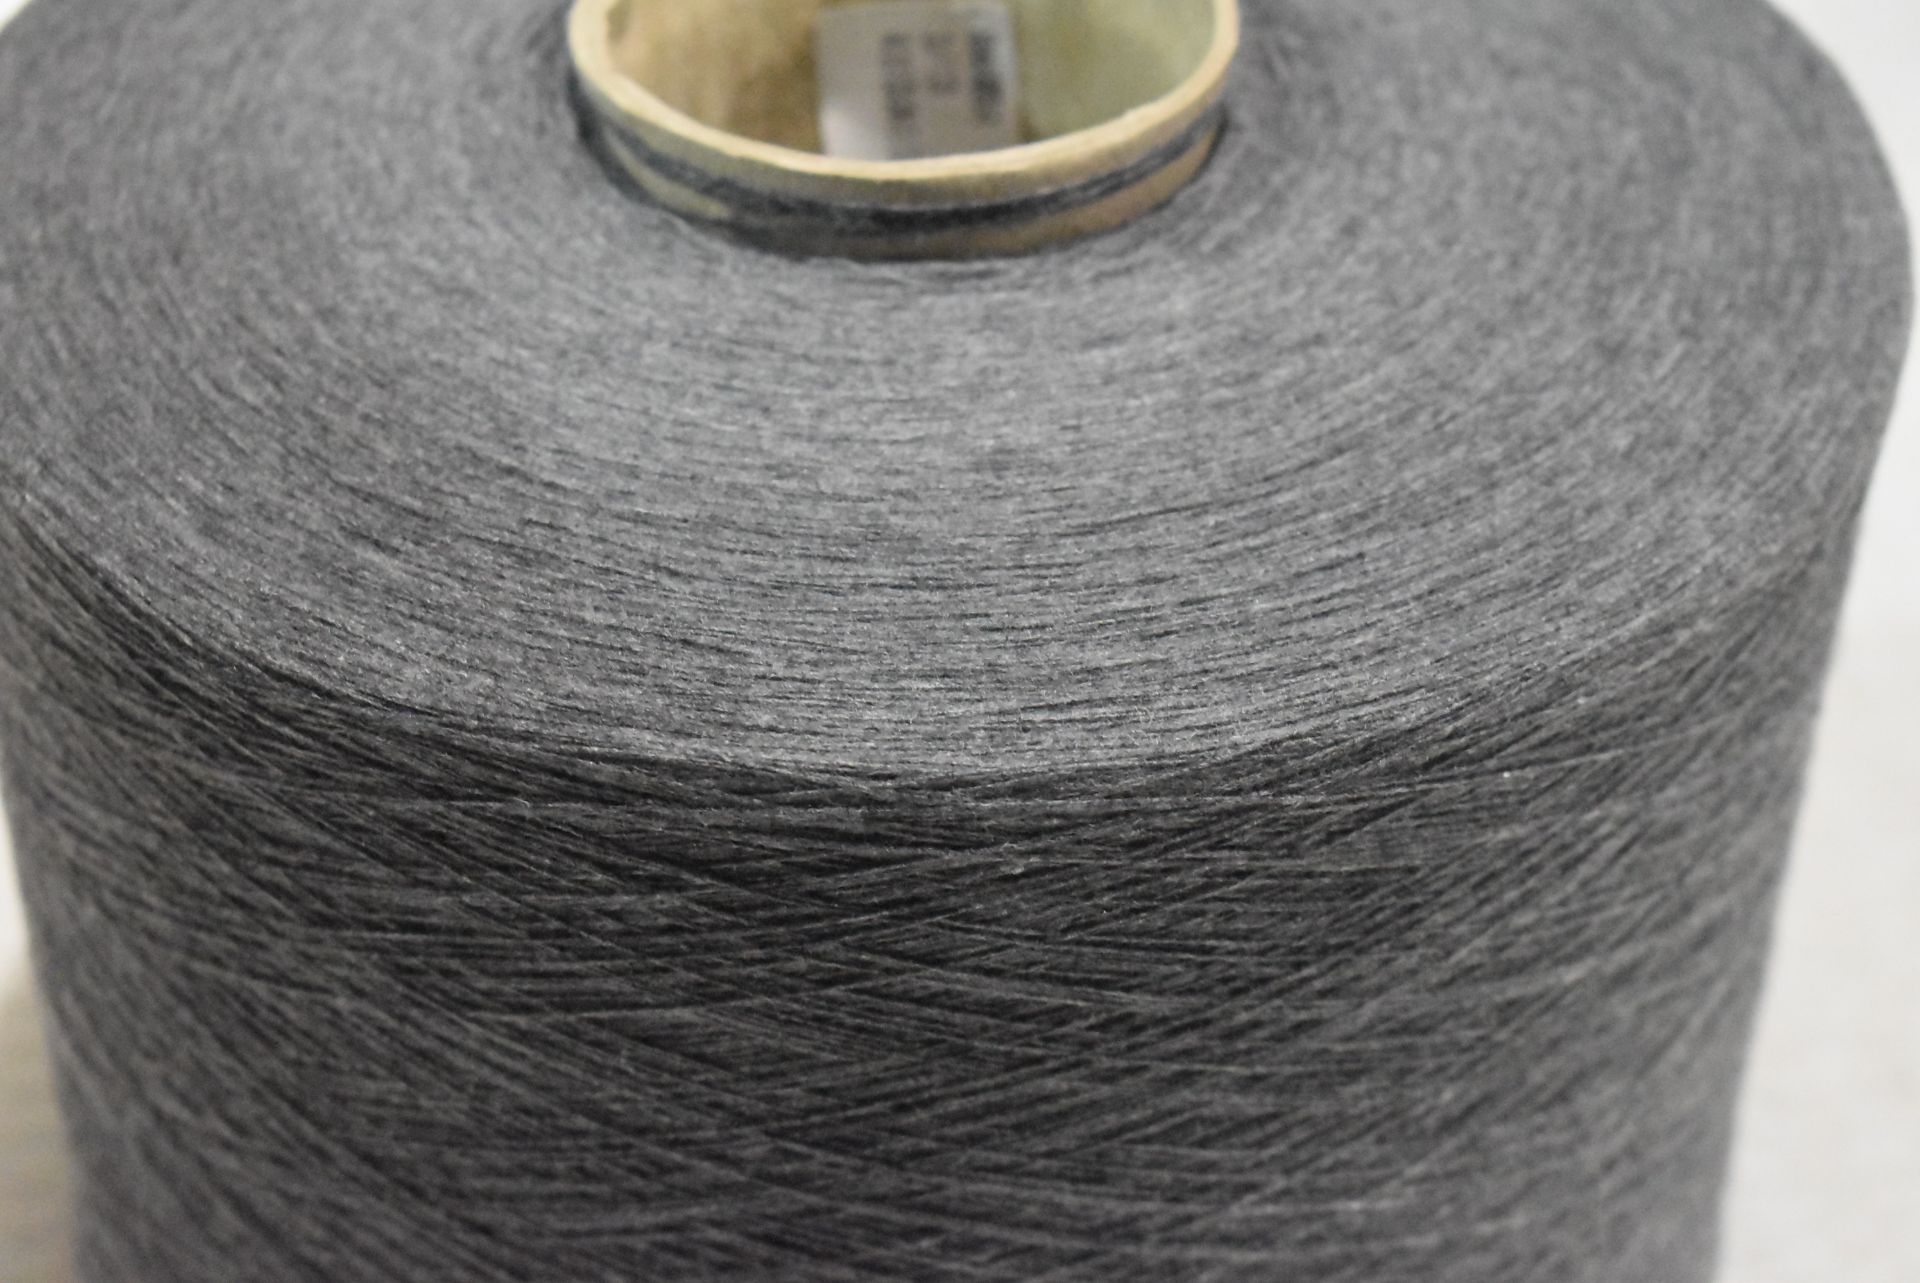 10 x Cones of 1/13 MicroCotton Knitting Yarn - Mid Grey - Approx Weight: 2,500g - New Stock ABL Yarn - Image 7 of 17